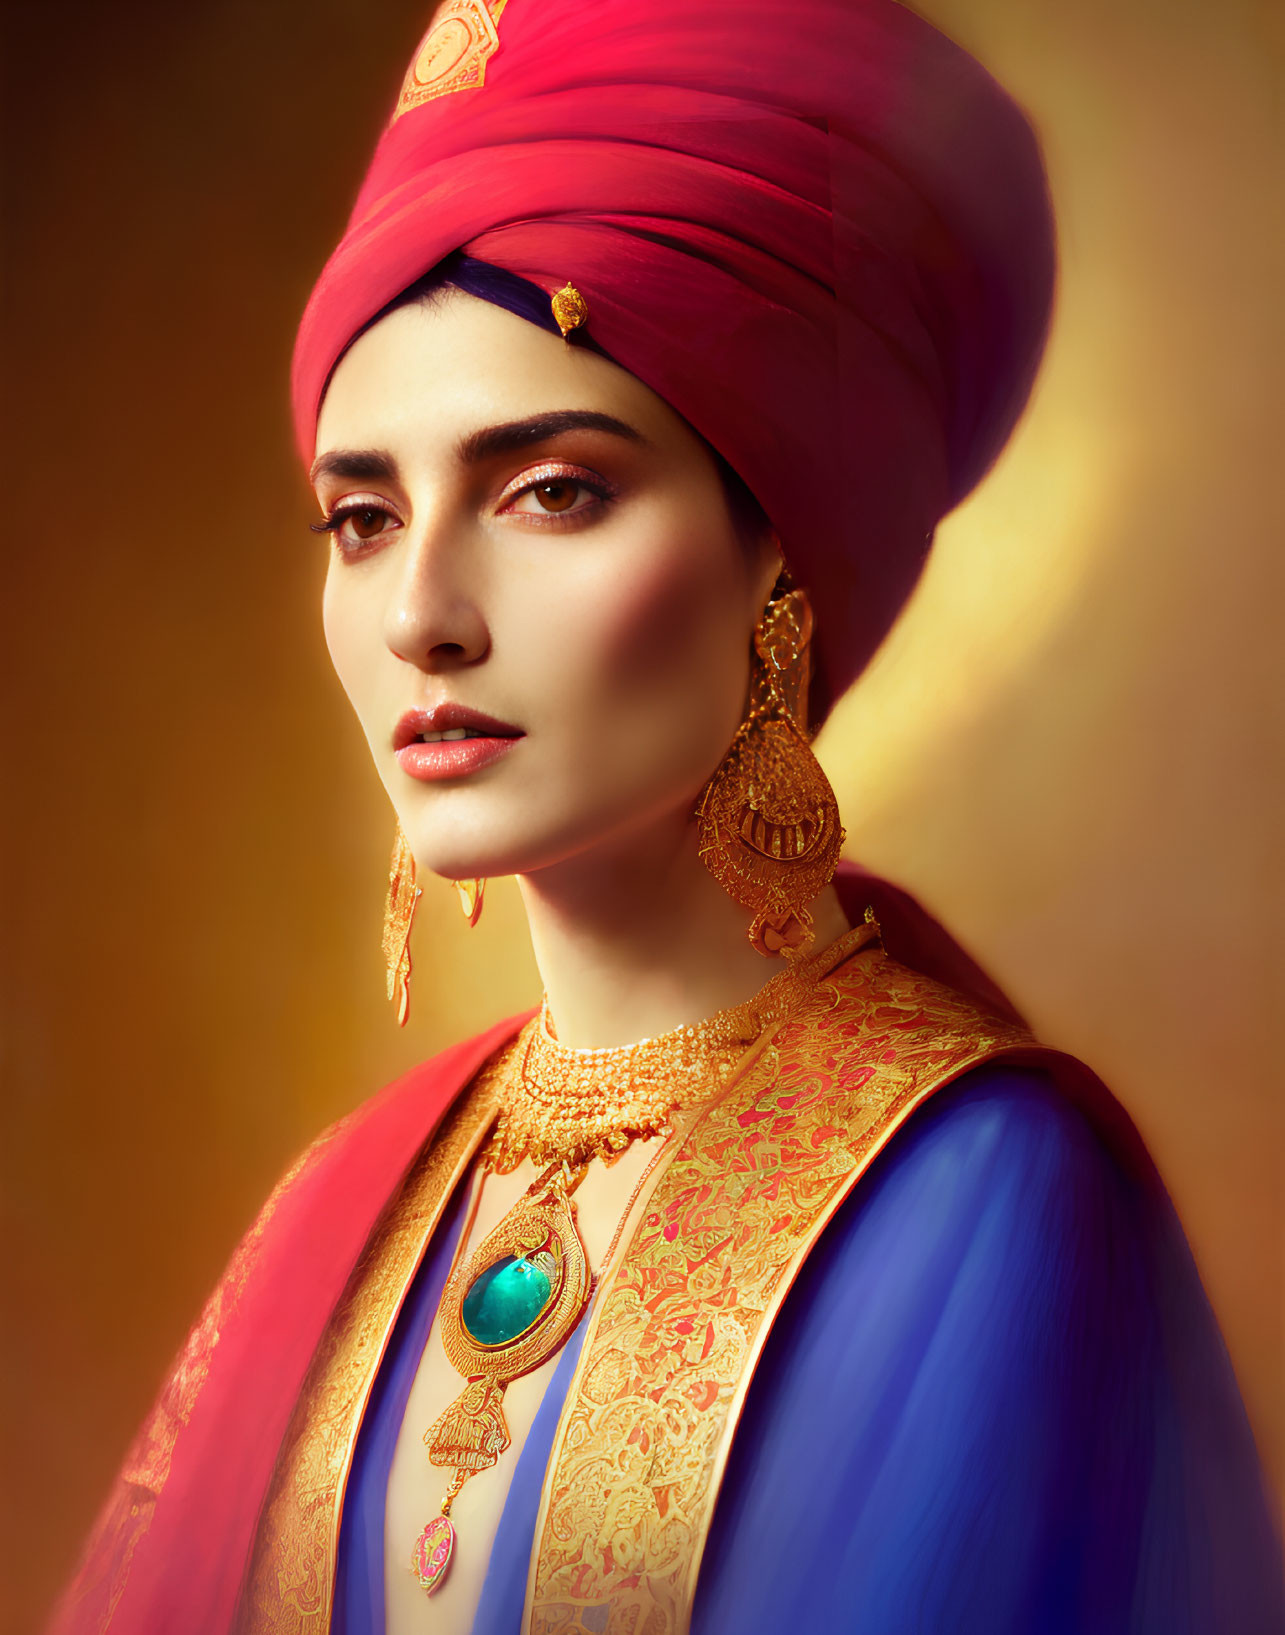 Portrait of a Woman in Red Turban and Traditional Outfit